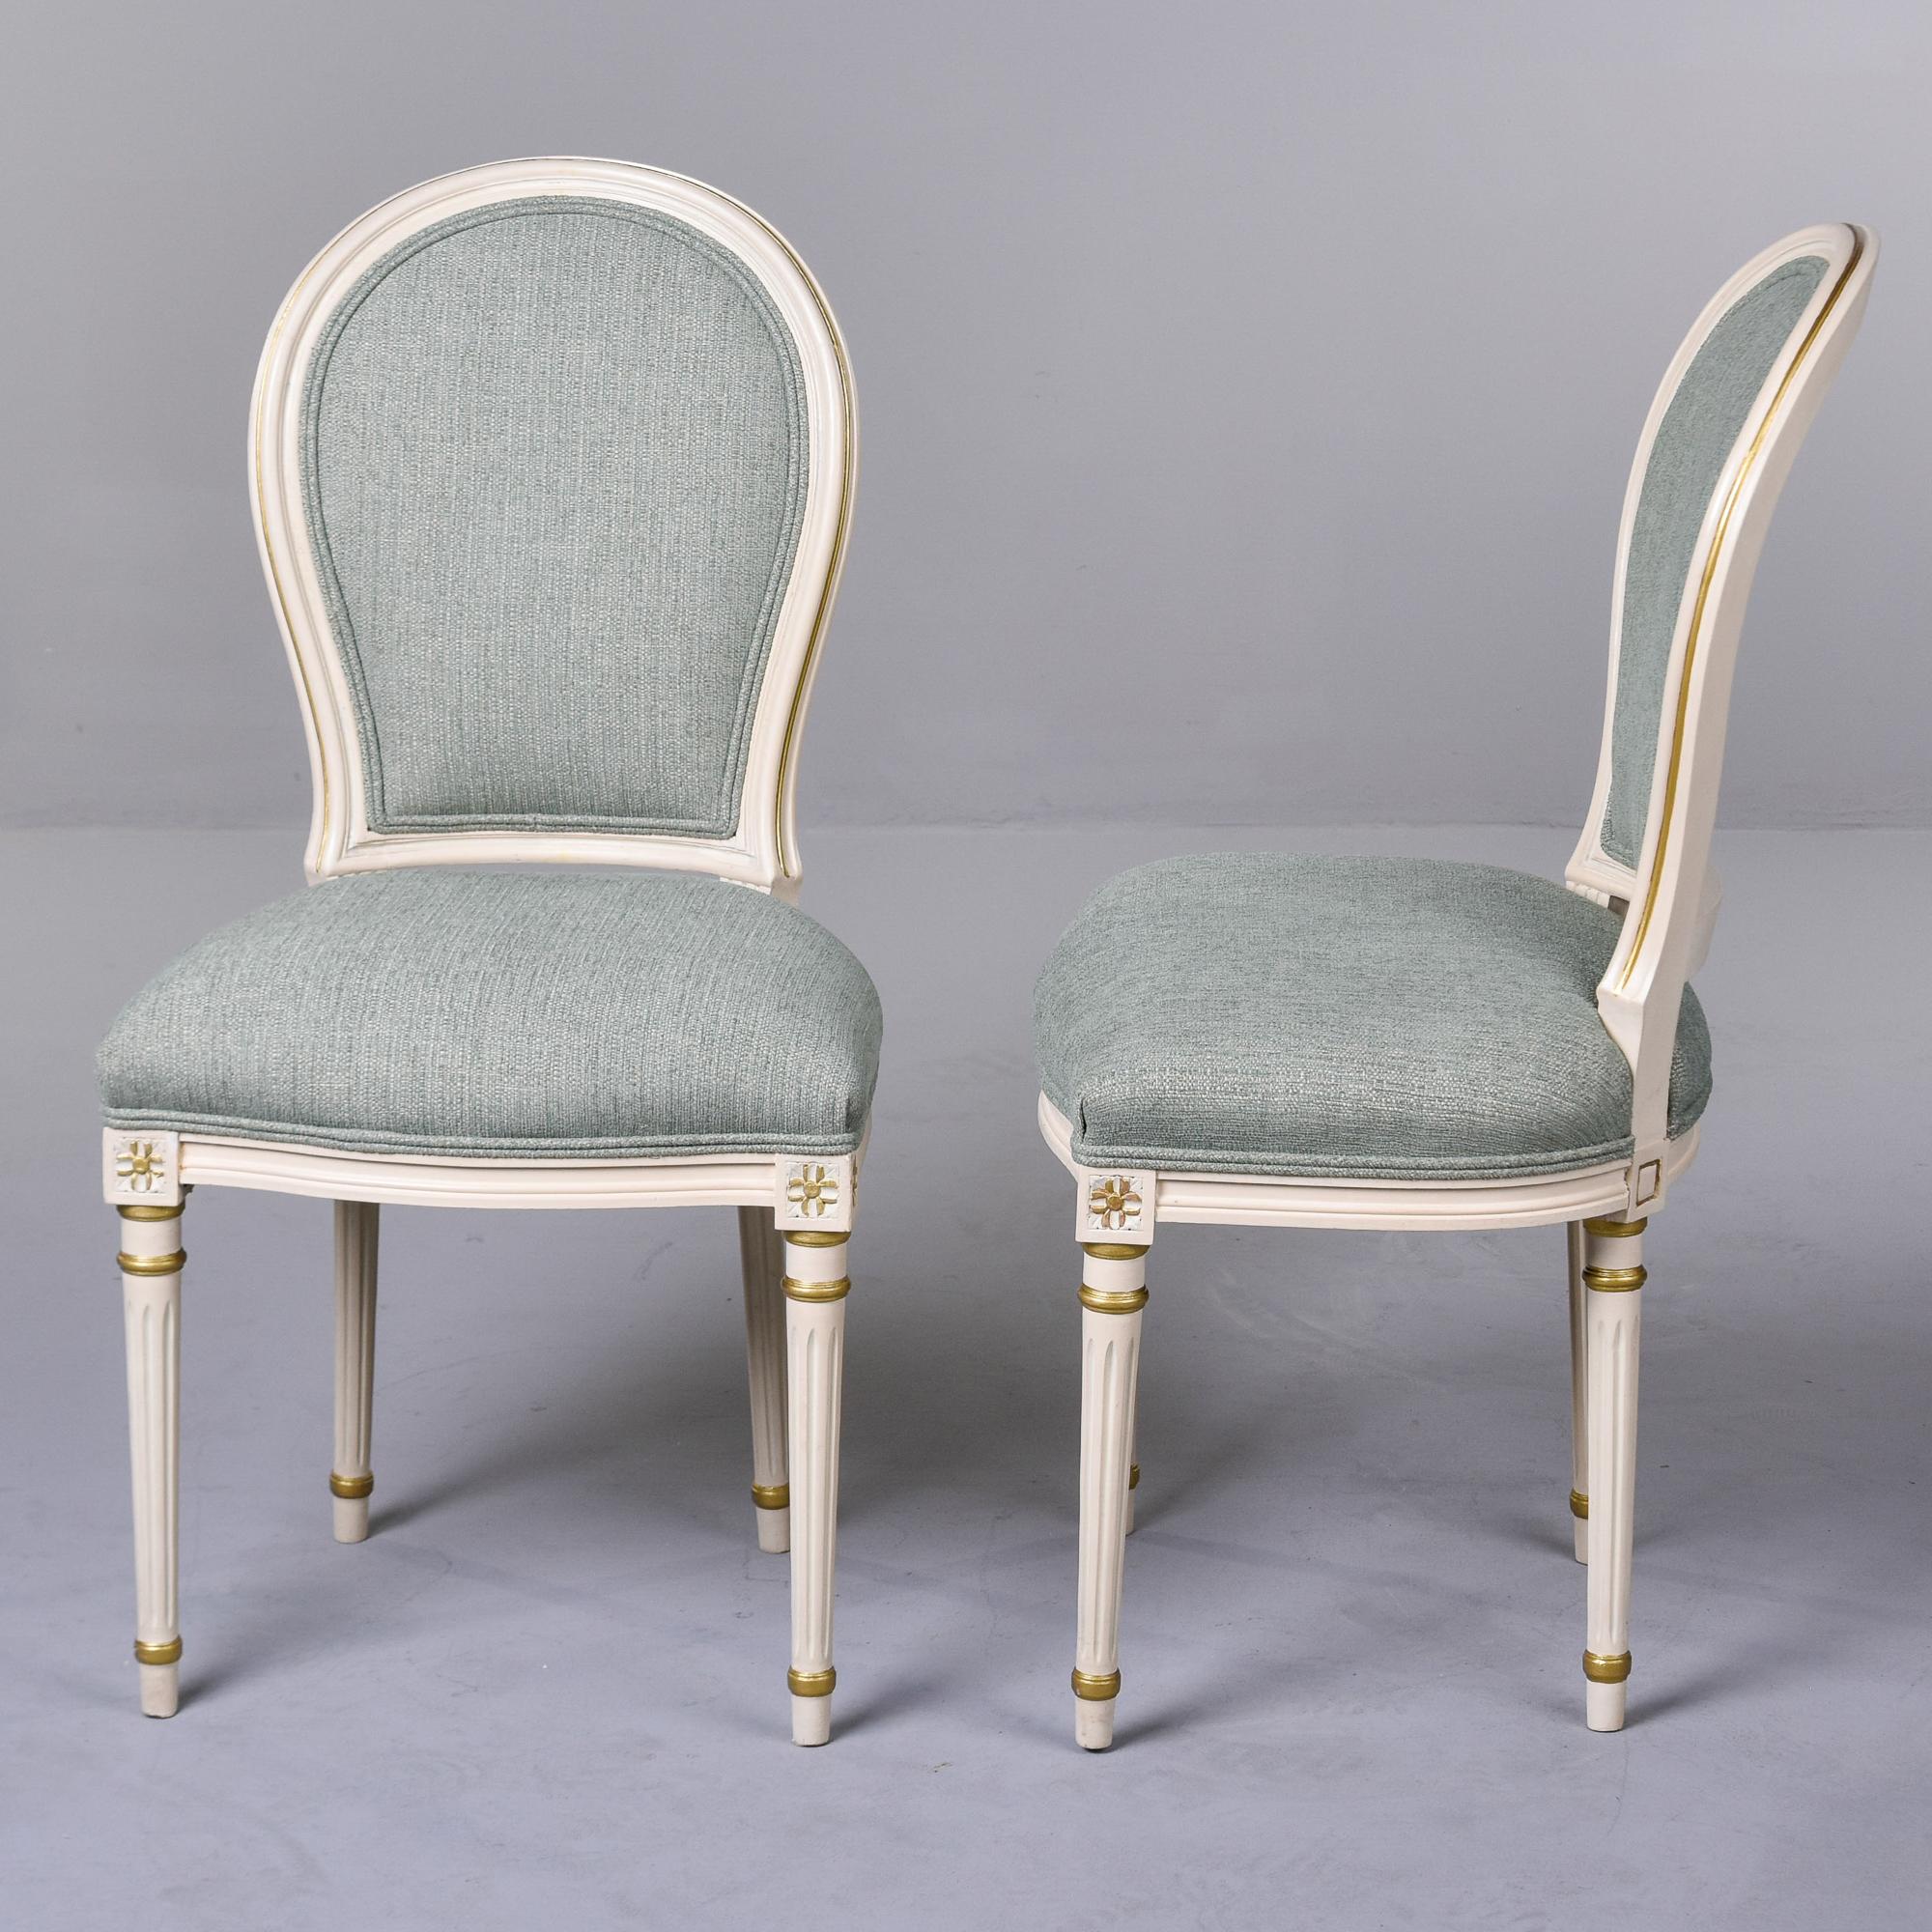 20th Century Set 6 French Early 20th C Louis XVI Style Dining Chairs with New Upholstery